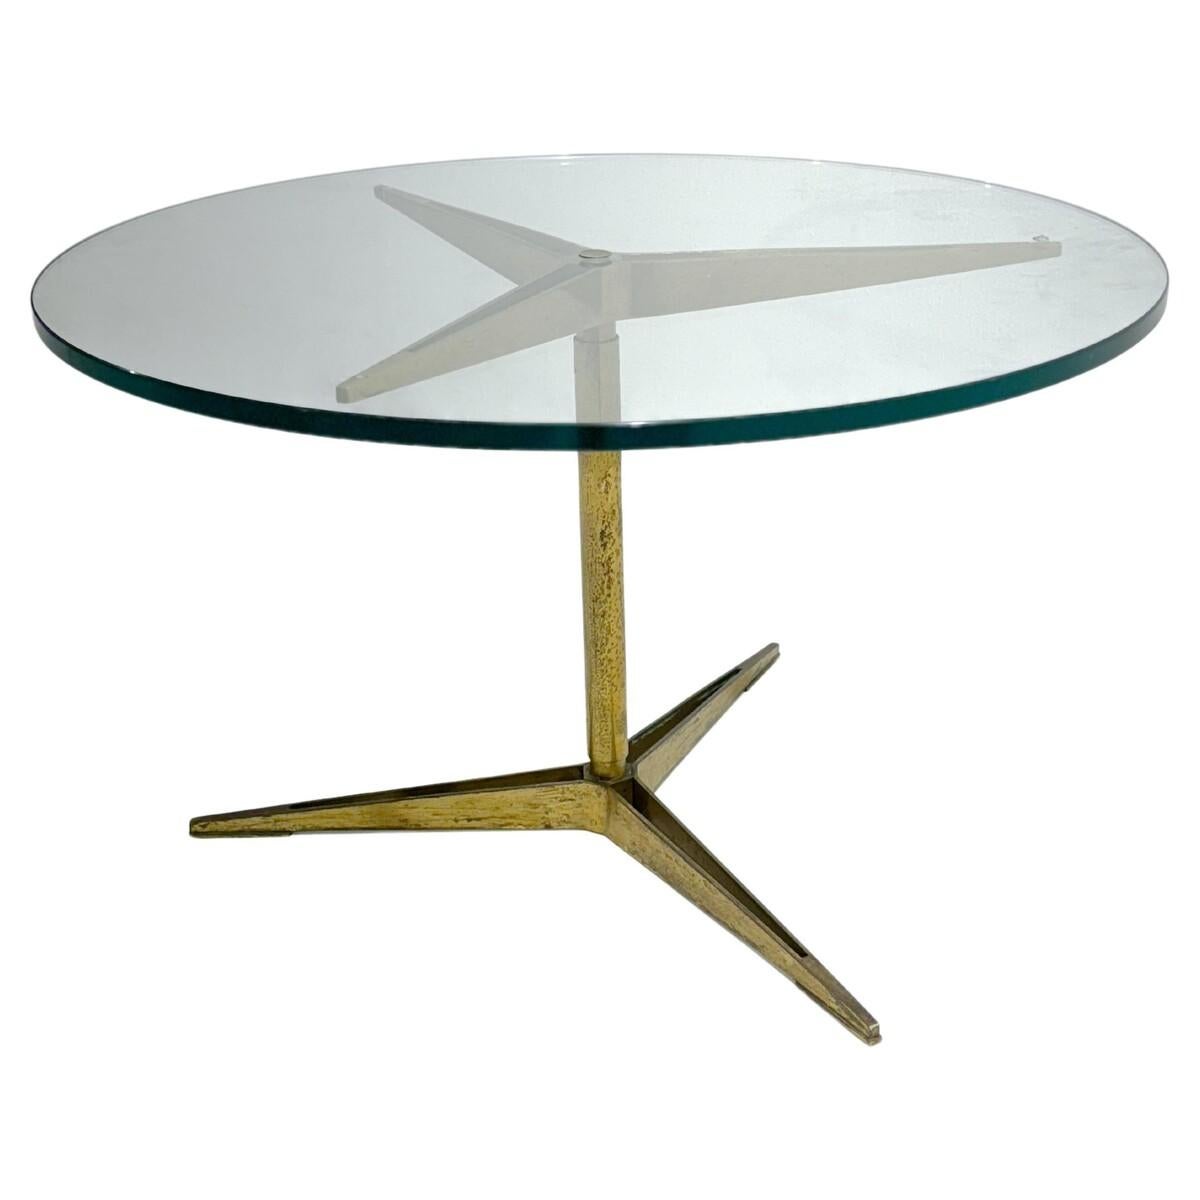 Italian Mid-Century Modern Side Table 1128 by Gio Ponti, Singer and Sons, 1950s For Sale